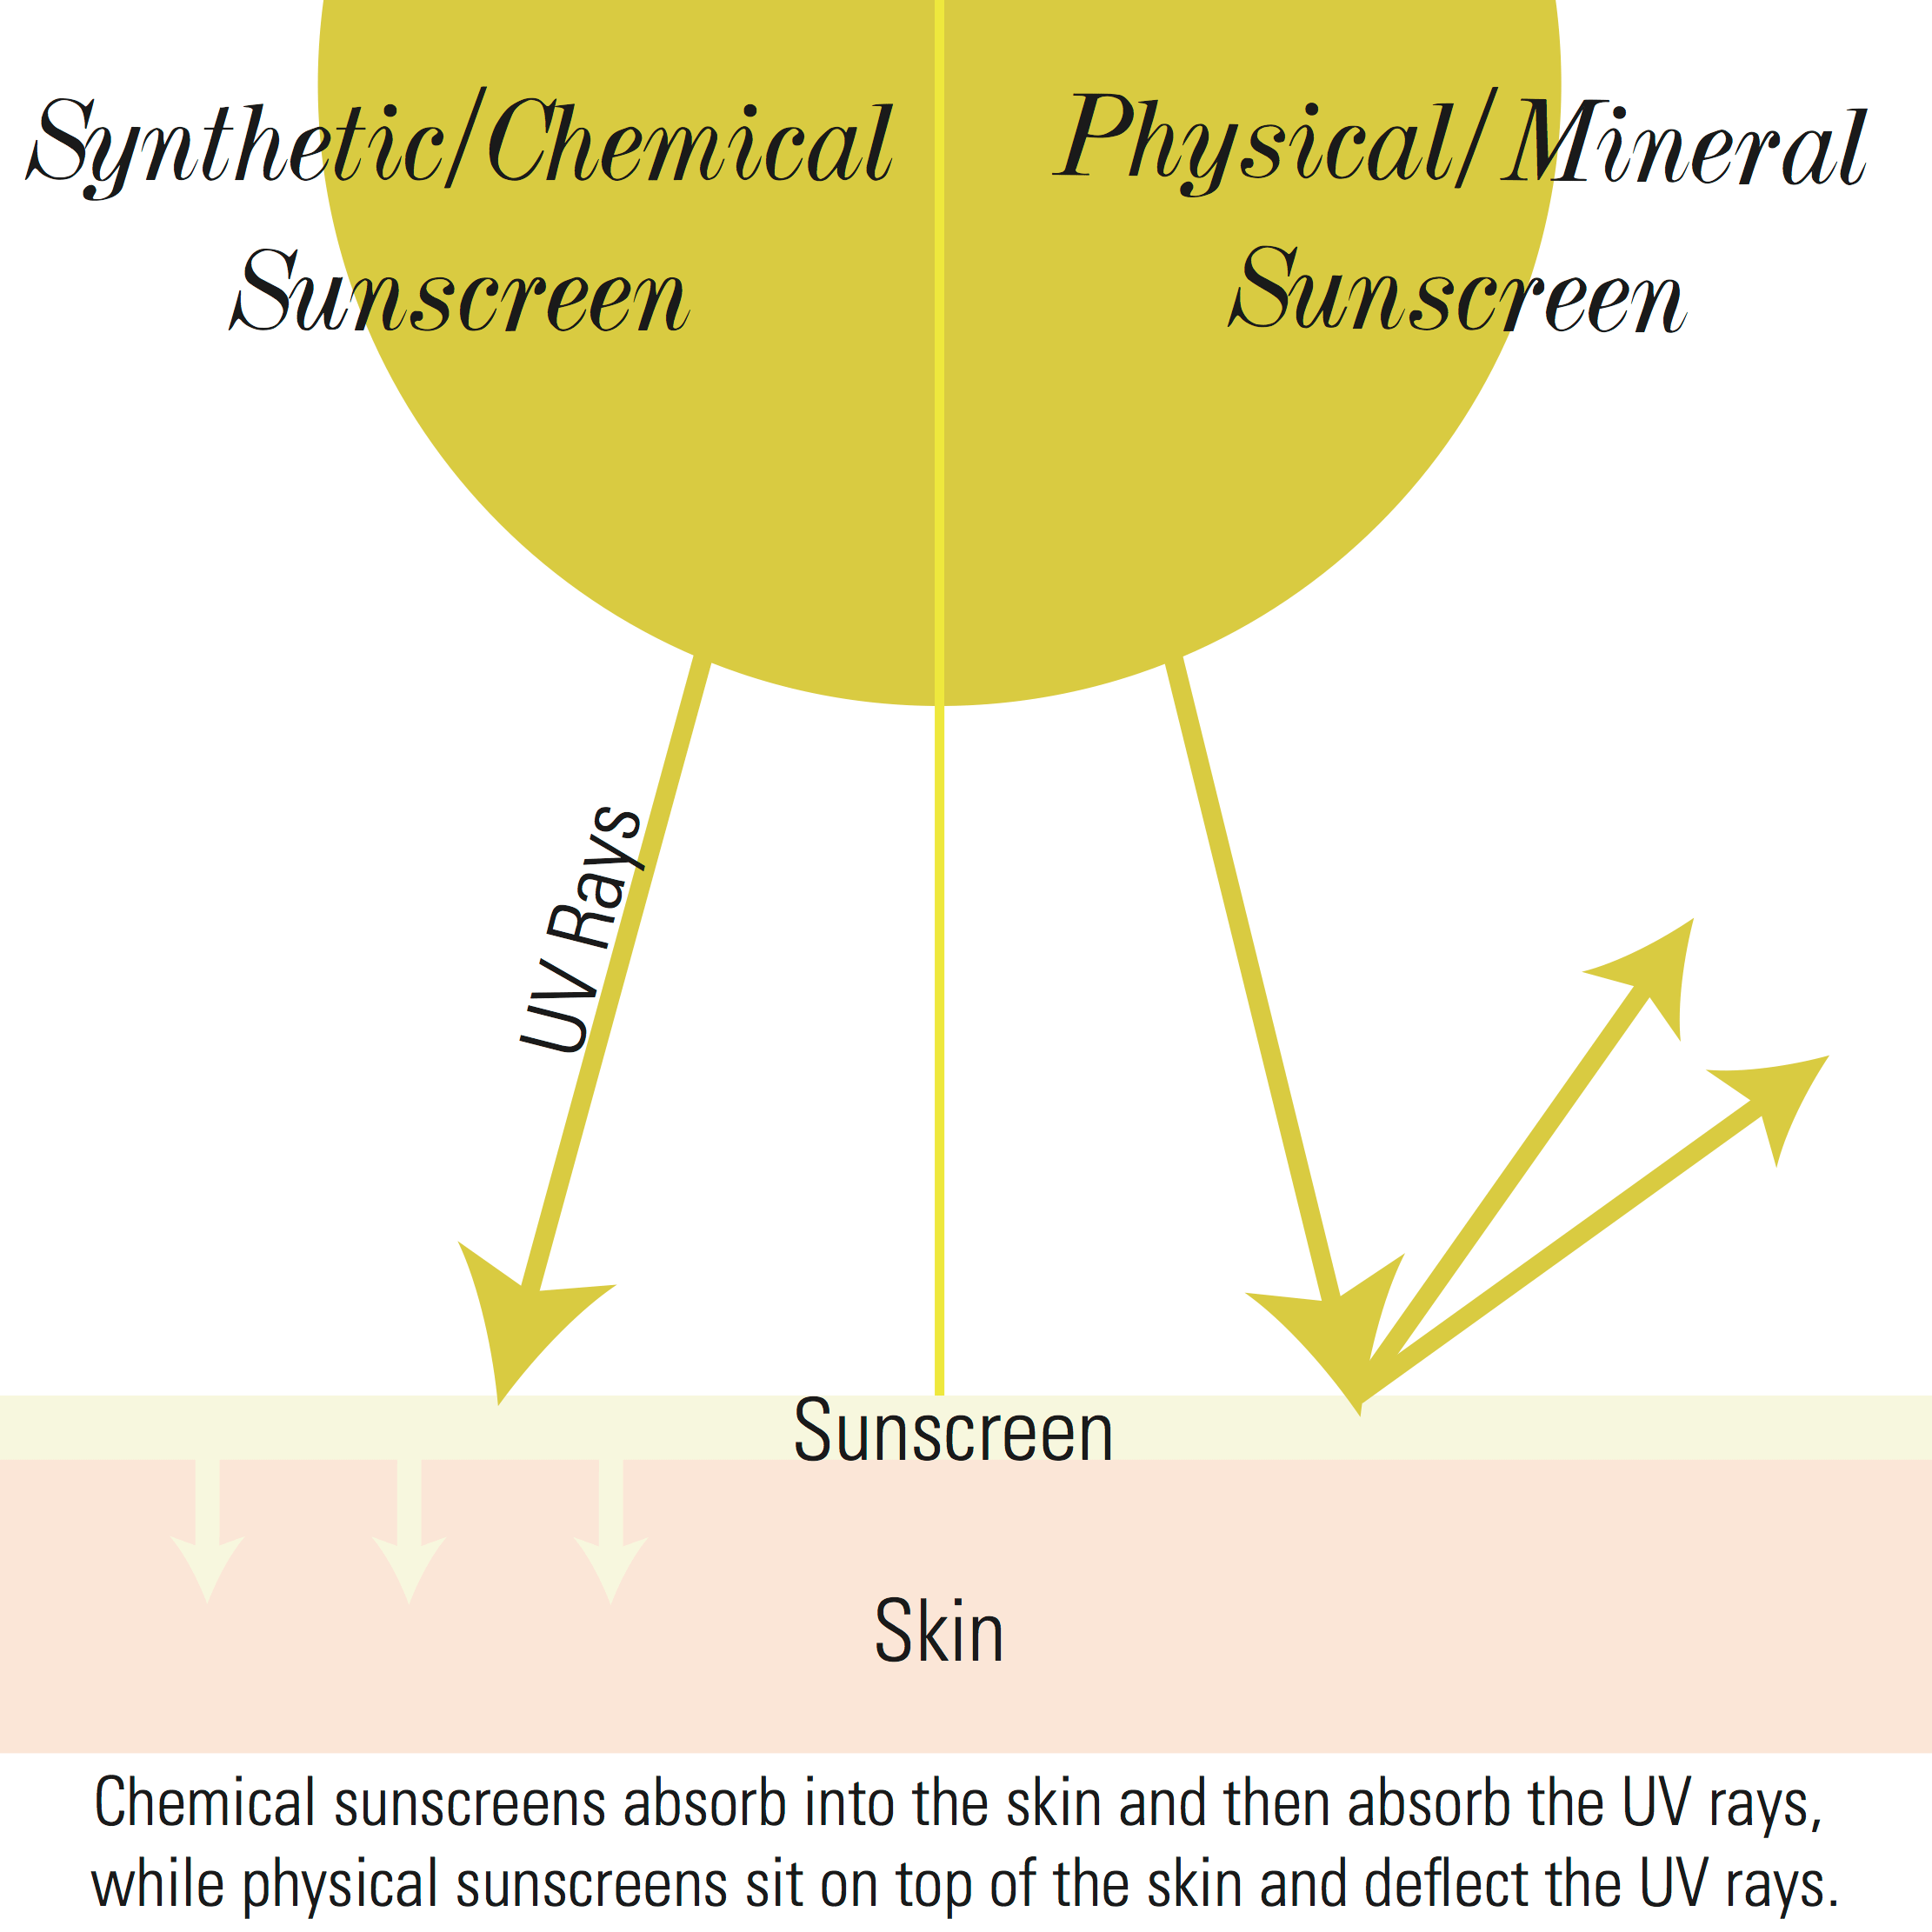 Should We Use Products Containing Chemical UV Absorbing Sunscreen Actives on Children?